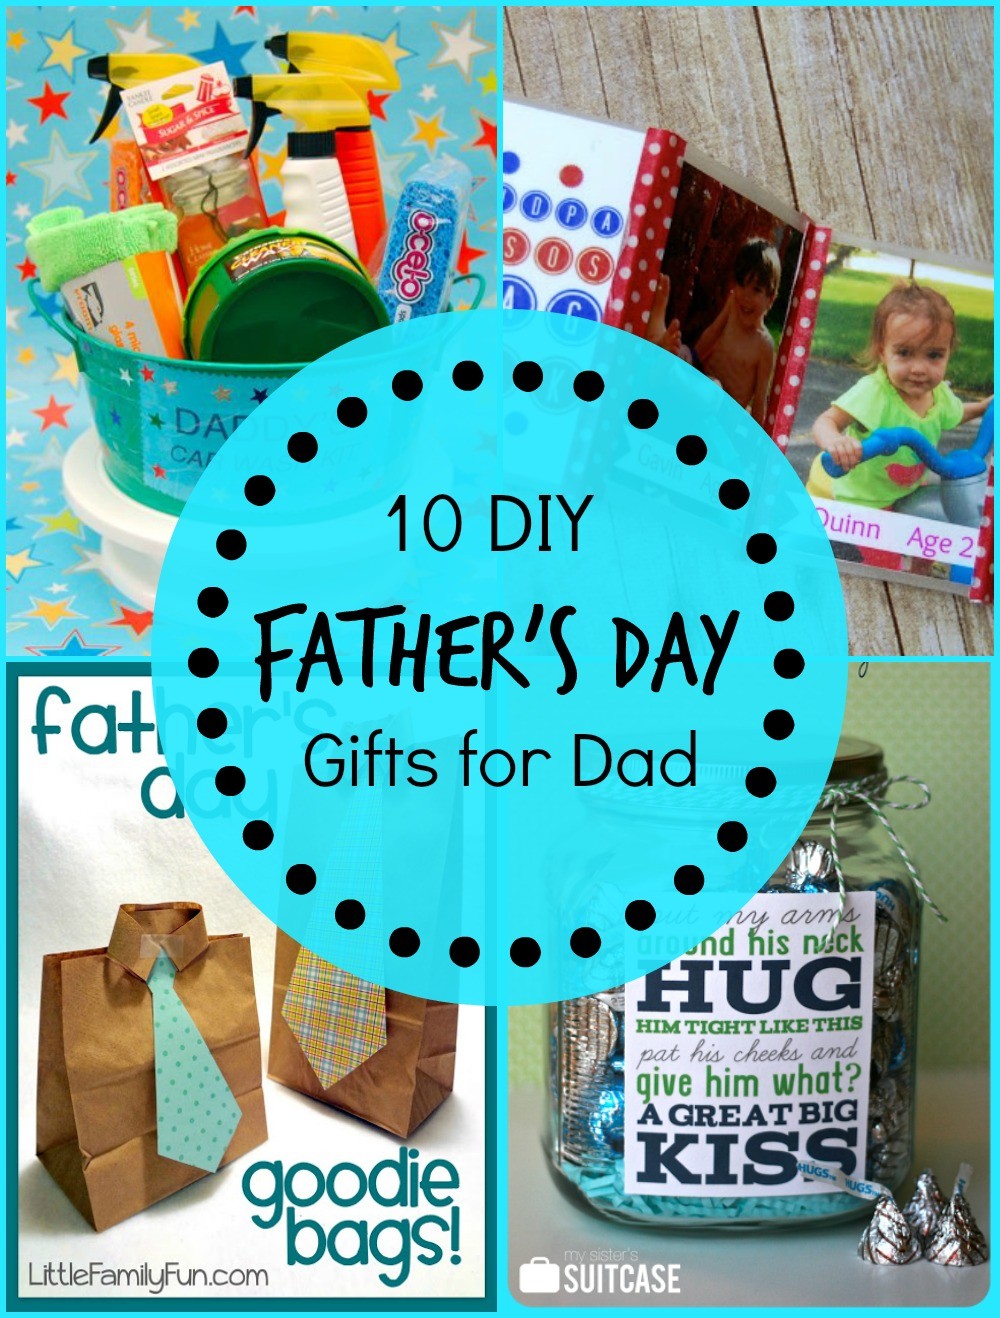 DIY Father's Day Gifts Rocks: Get Crafty and Show Love